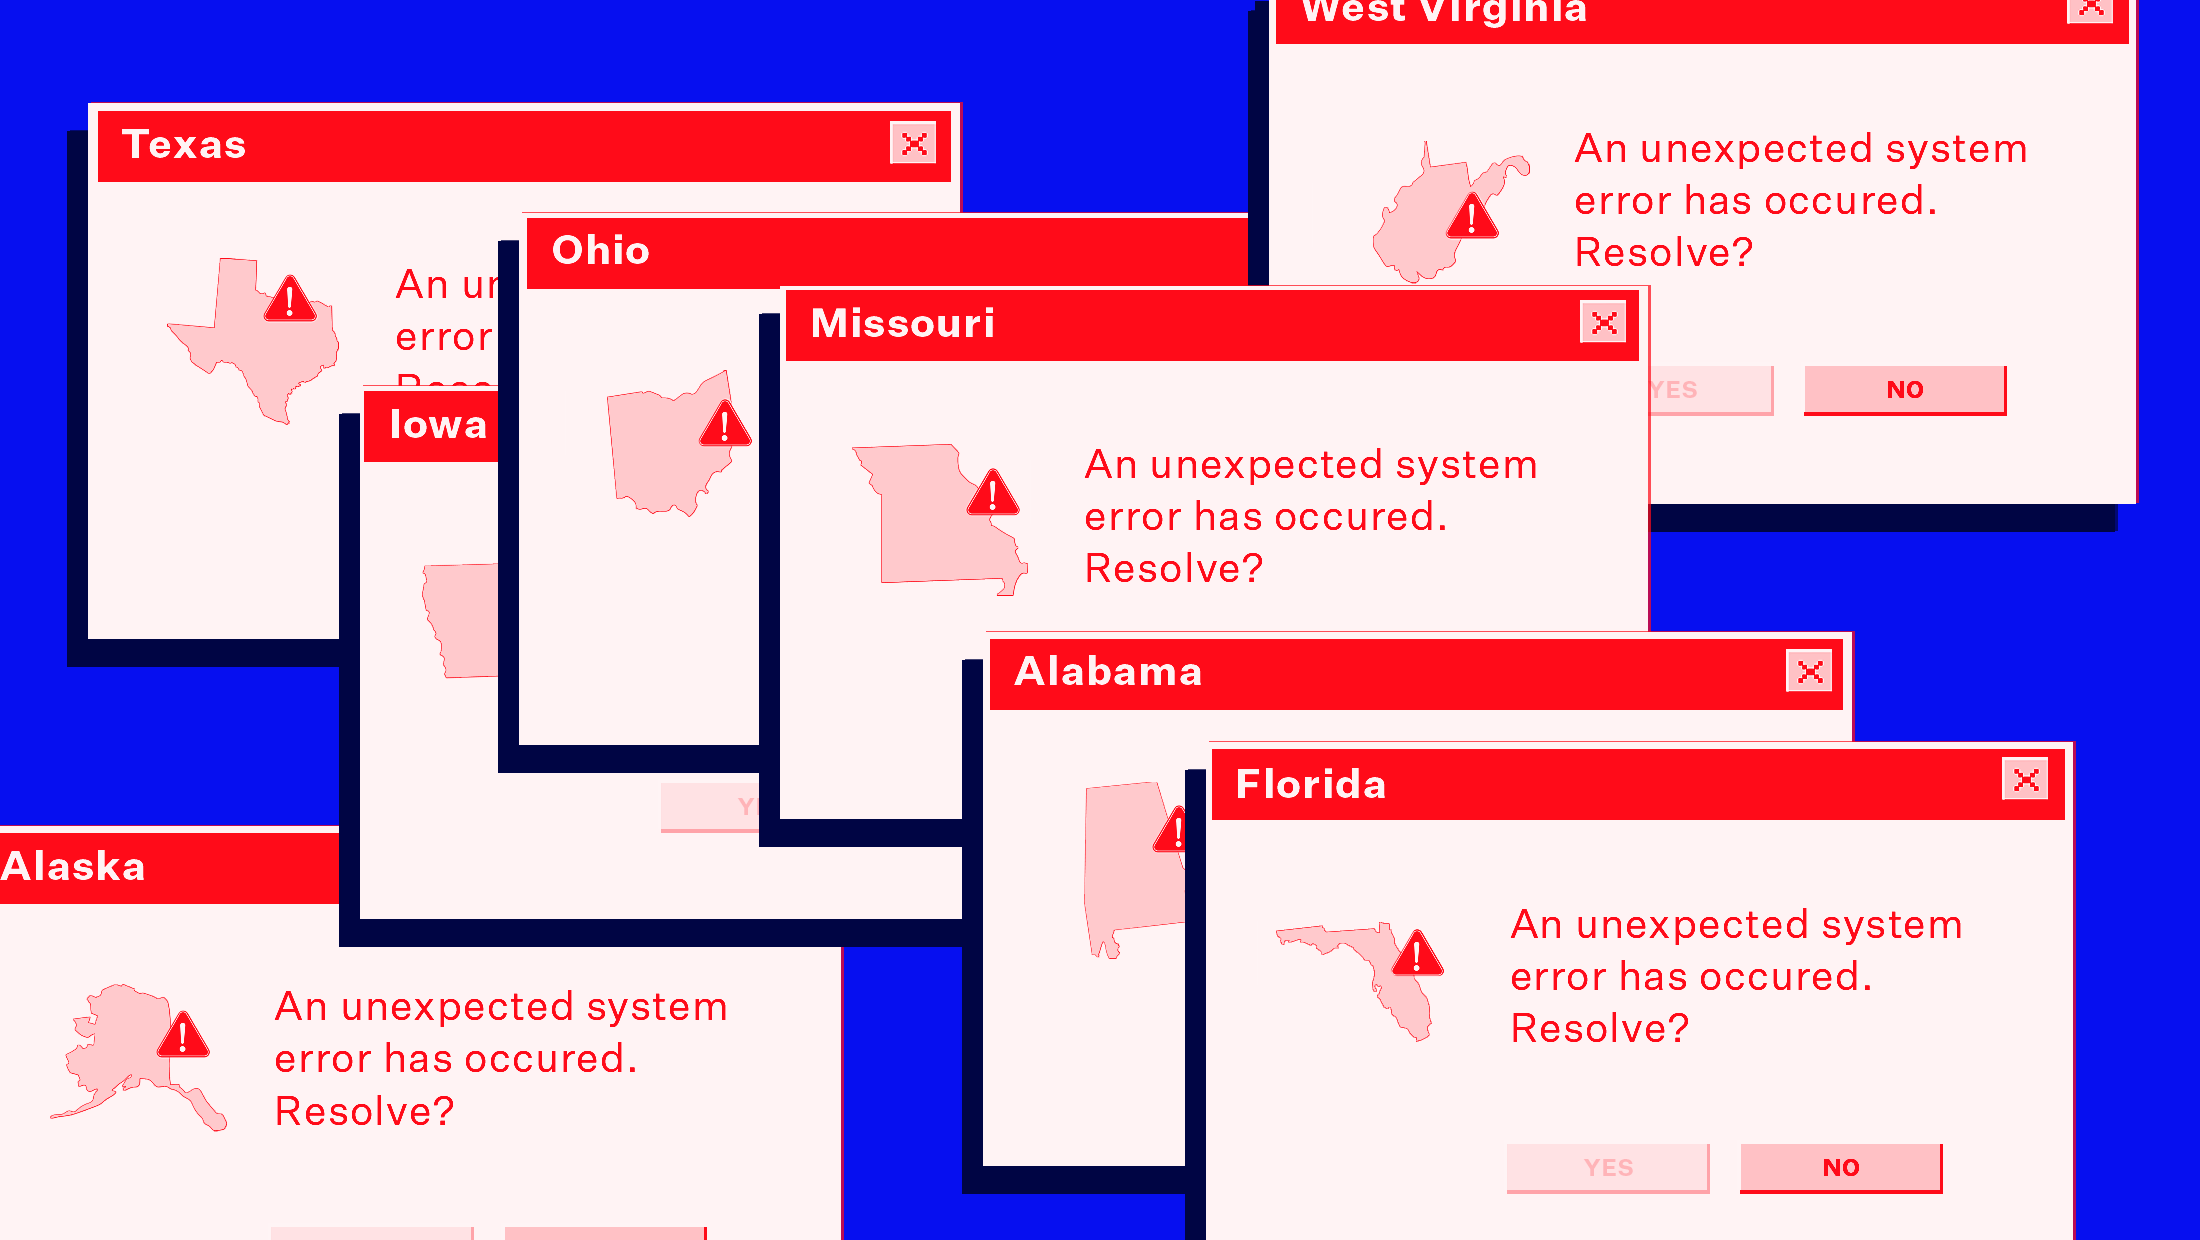 Blue background with red error messages piled on top of each other that read: "An unexpected system error has occurred. Resolve? YES NO" and each error message has a different state written on the top. From the left: Alaska, Texas, Iowa, Ohio, Missouri, Alabama, Florida and West Virginia.